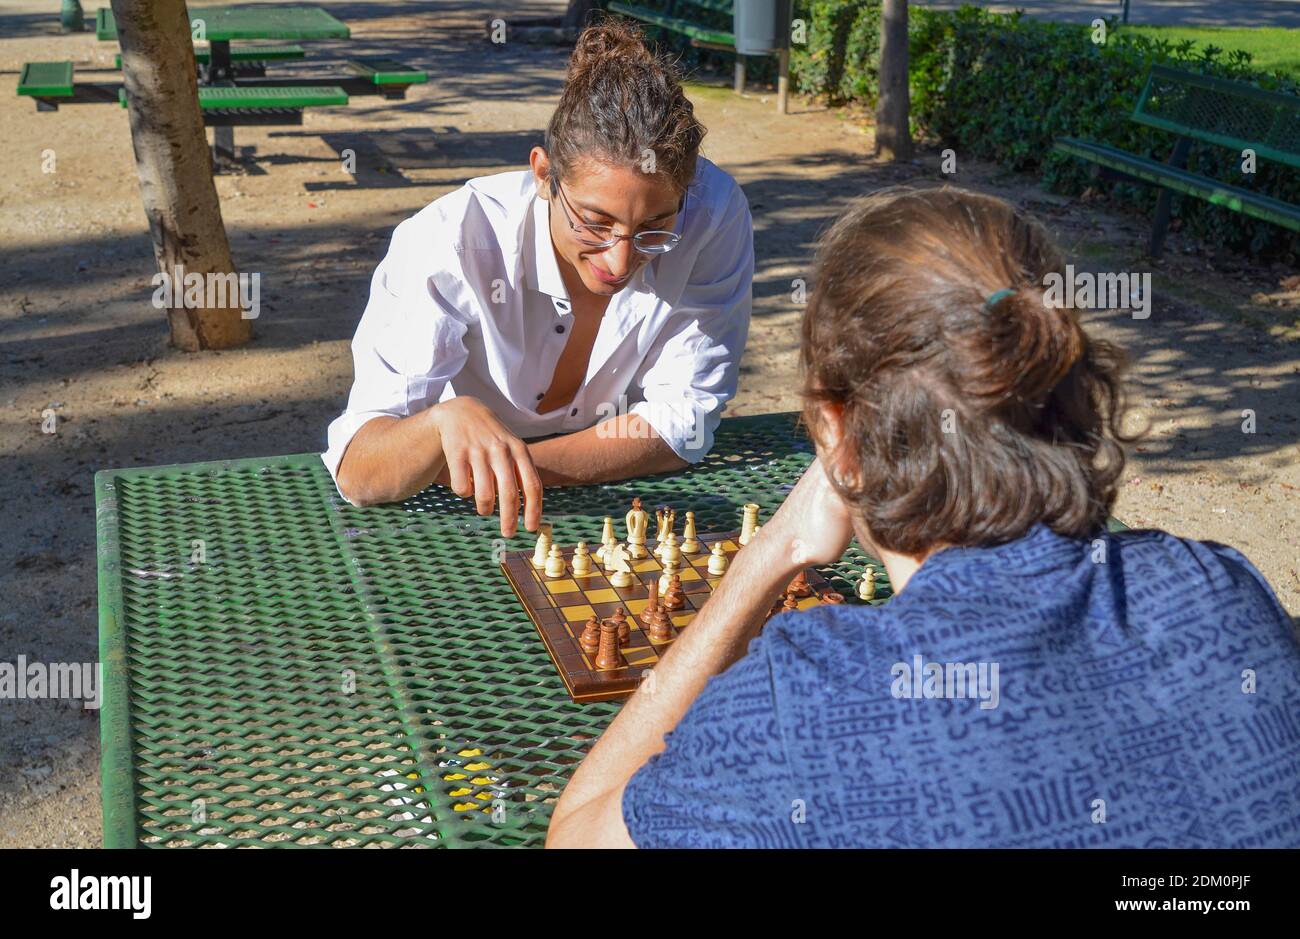 A closeup shot of a young man playing chess in the park Stock Photo